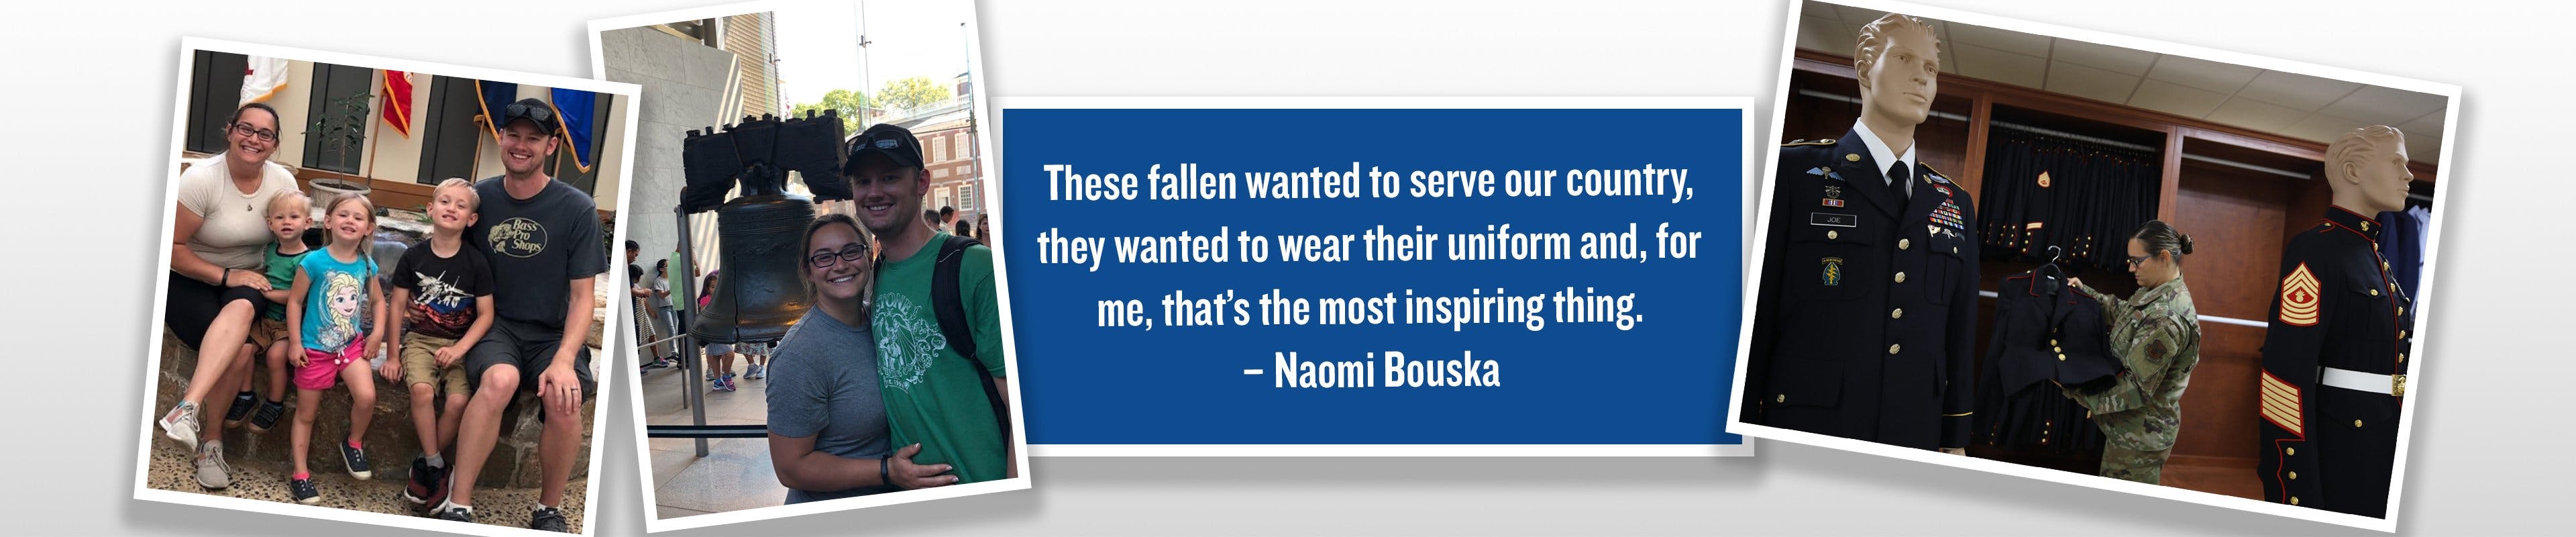 Military Naomi Bouska quote AmFam with smiling friend and kids